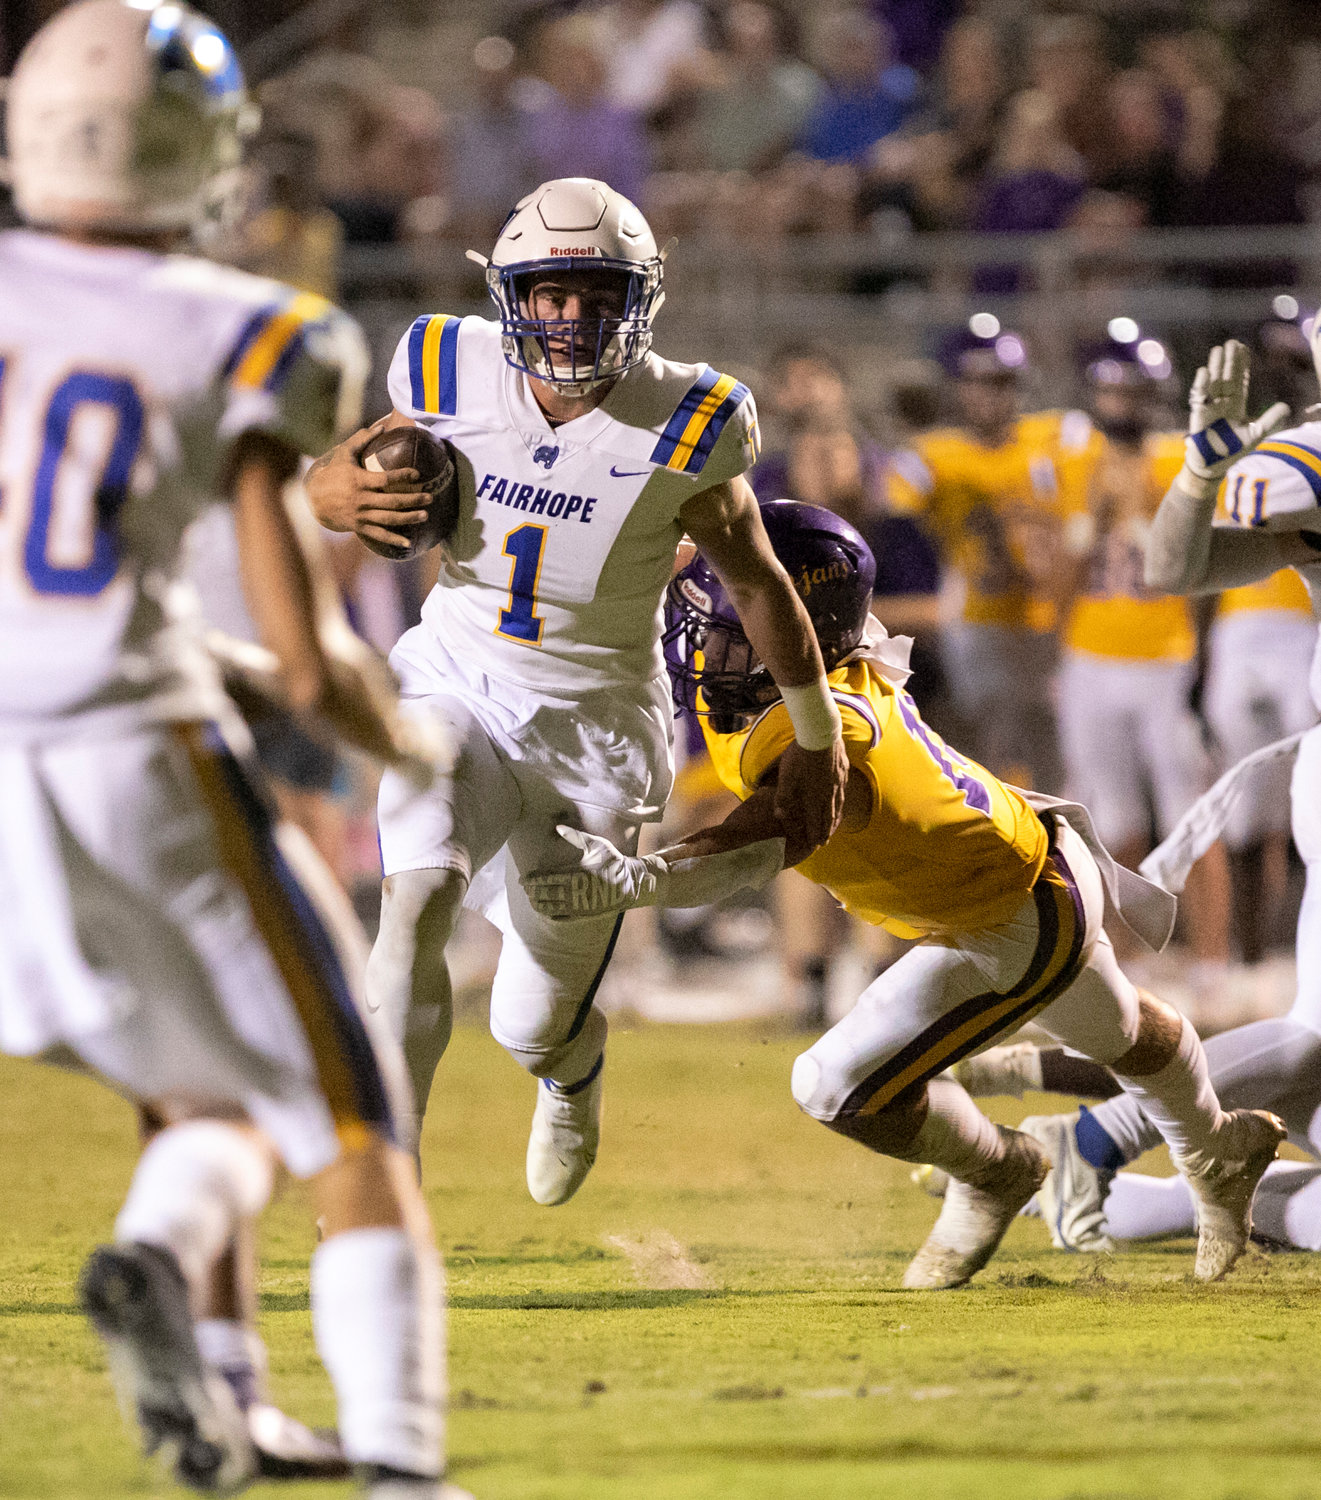 Fairhope senior quarterback Caden Creel sheds a tackle and looks upfield during the Pirates’ Class 7A Region 1 game against the Daphne Trojans at Jubilee Stadium Oct. 7. Fairhope qualified for its sixth consecutive postseason and will hit the road to open the playoffs Nov. 4.